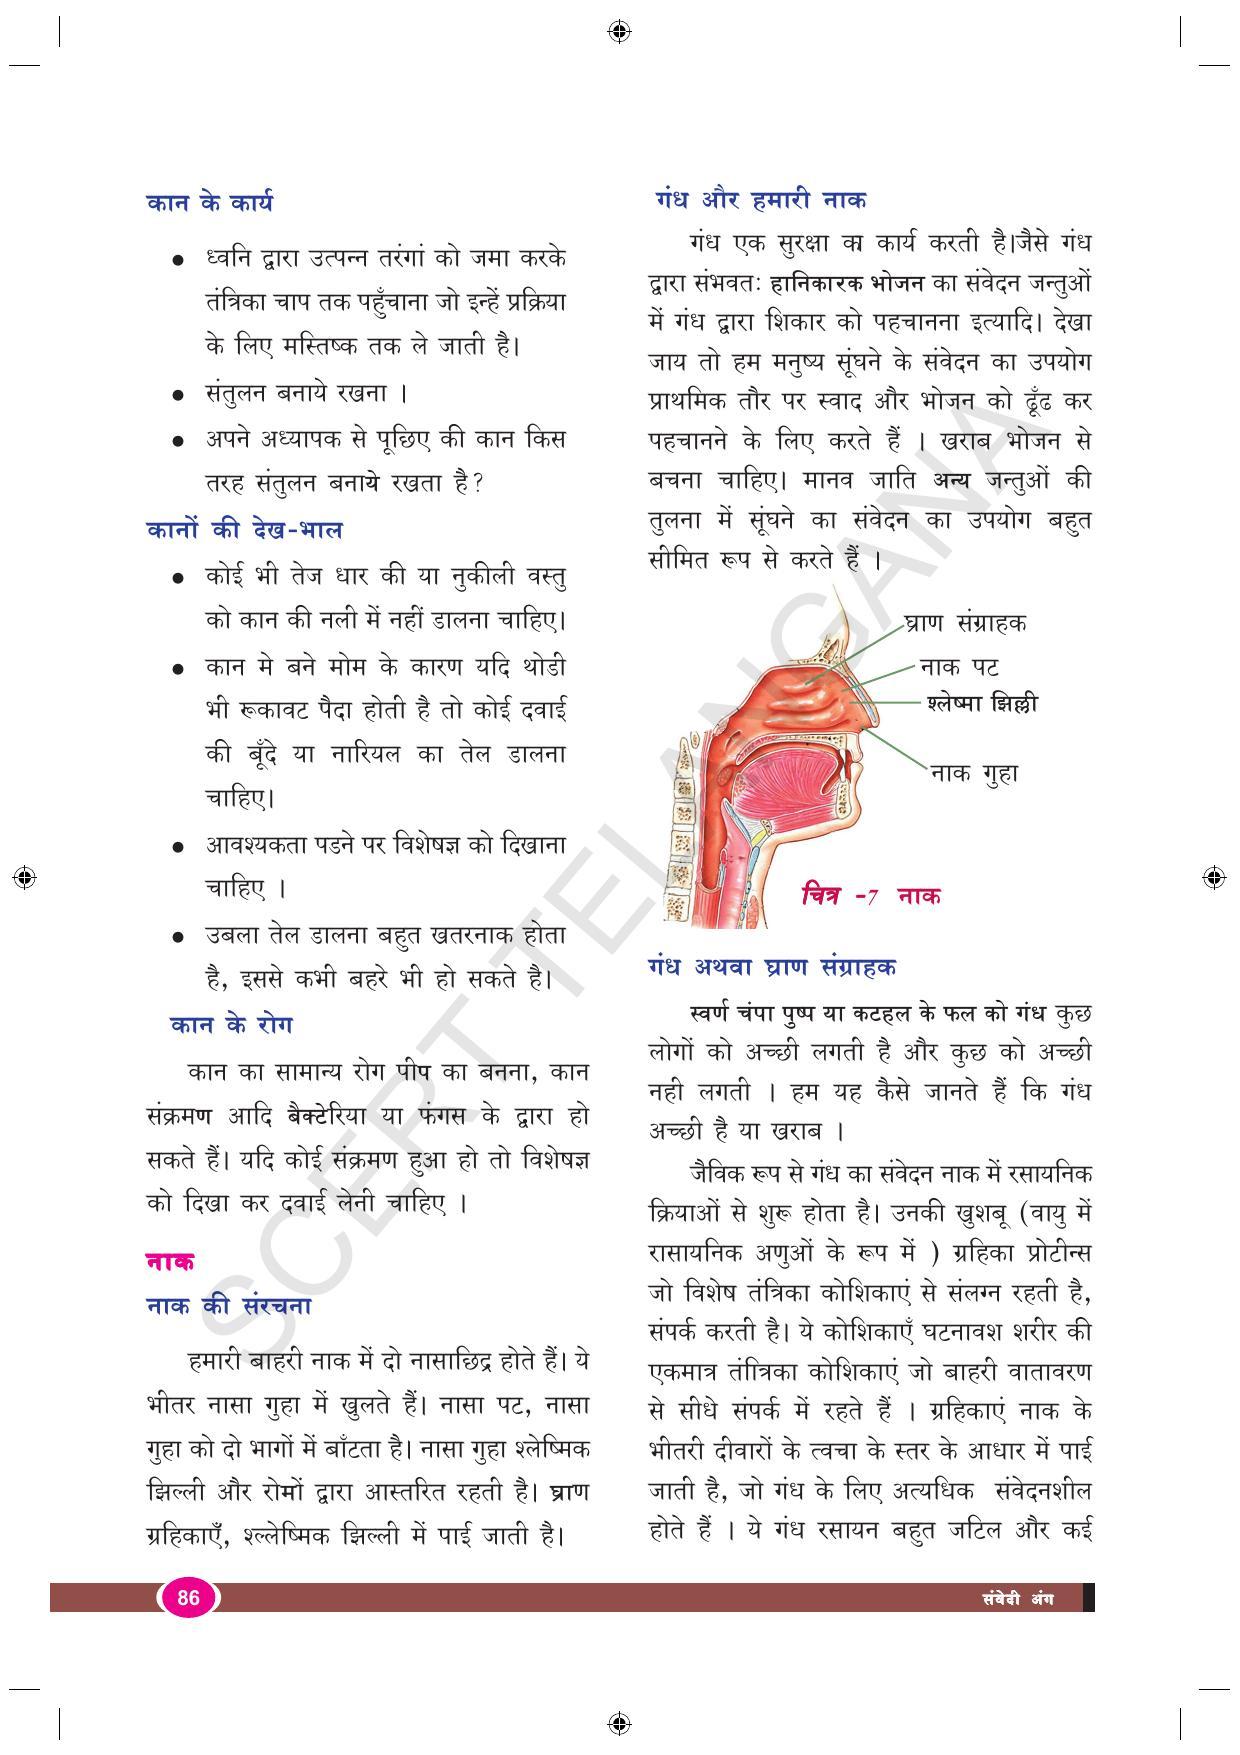 TS SCERT Class 9 Biological Science (Hindi Medium) Text Book - Page 98